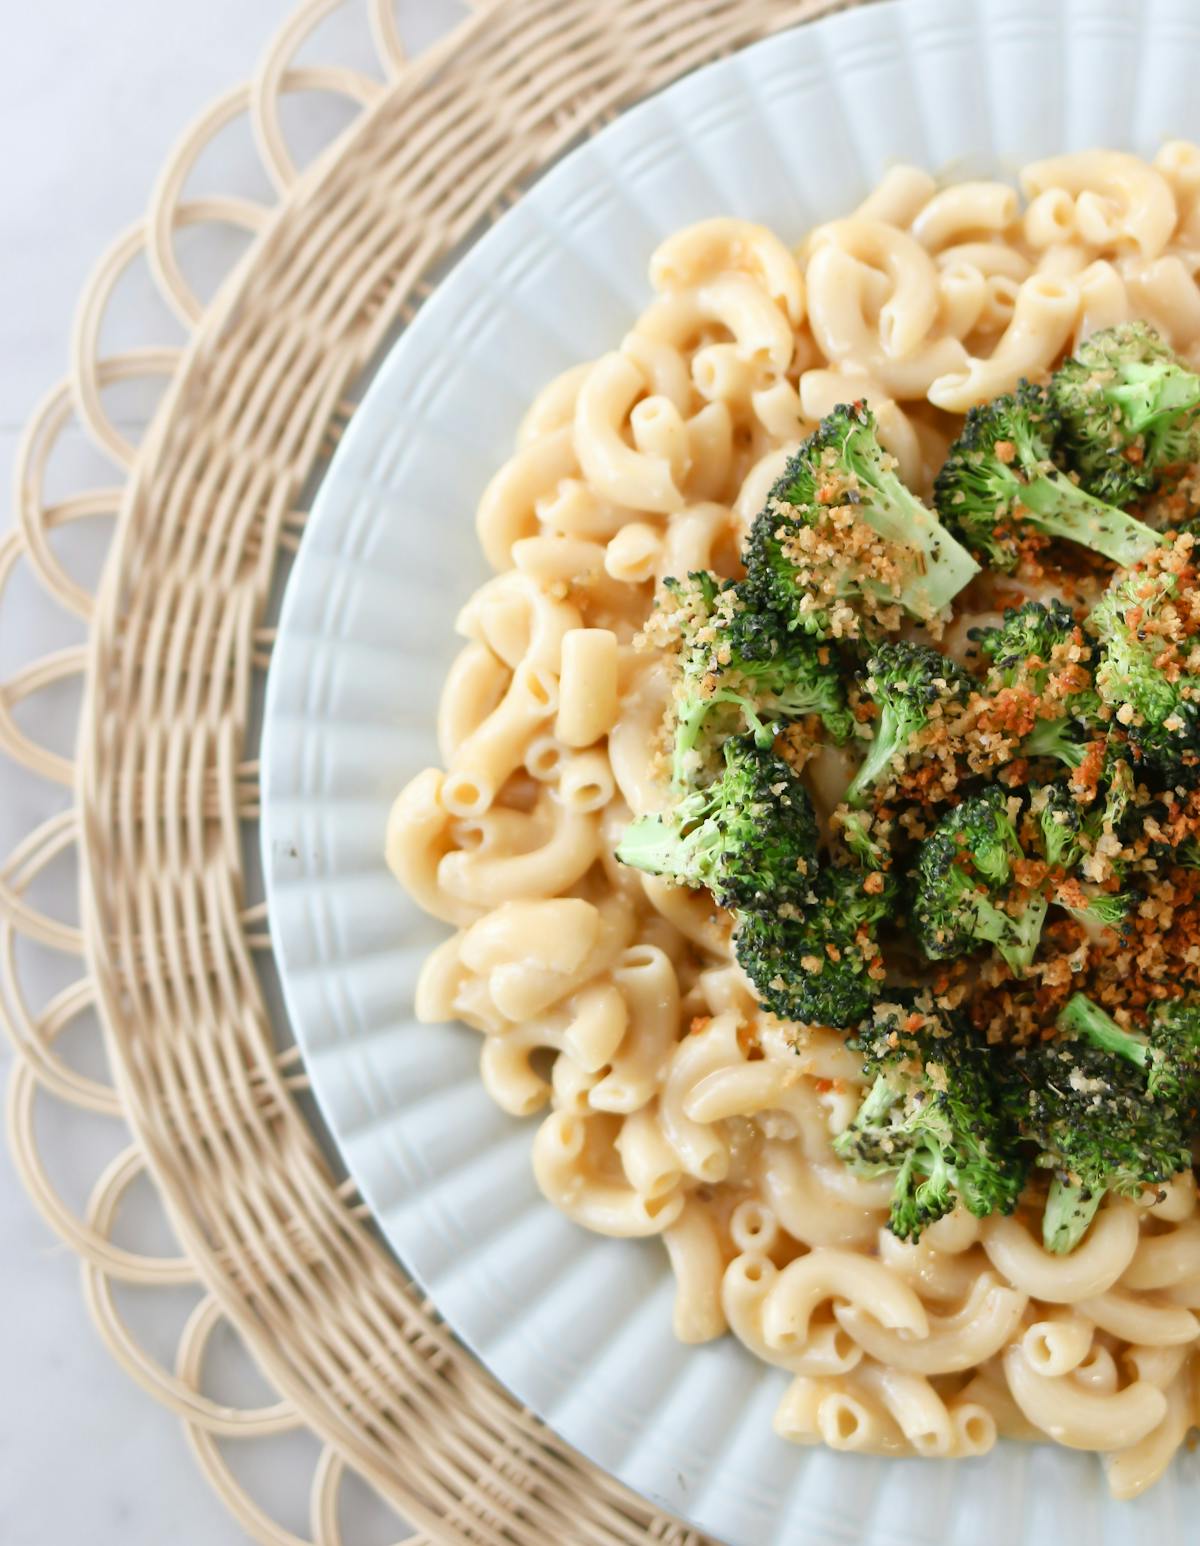 a bowl filled with pasta and broccoli on a plate